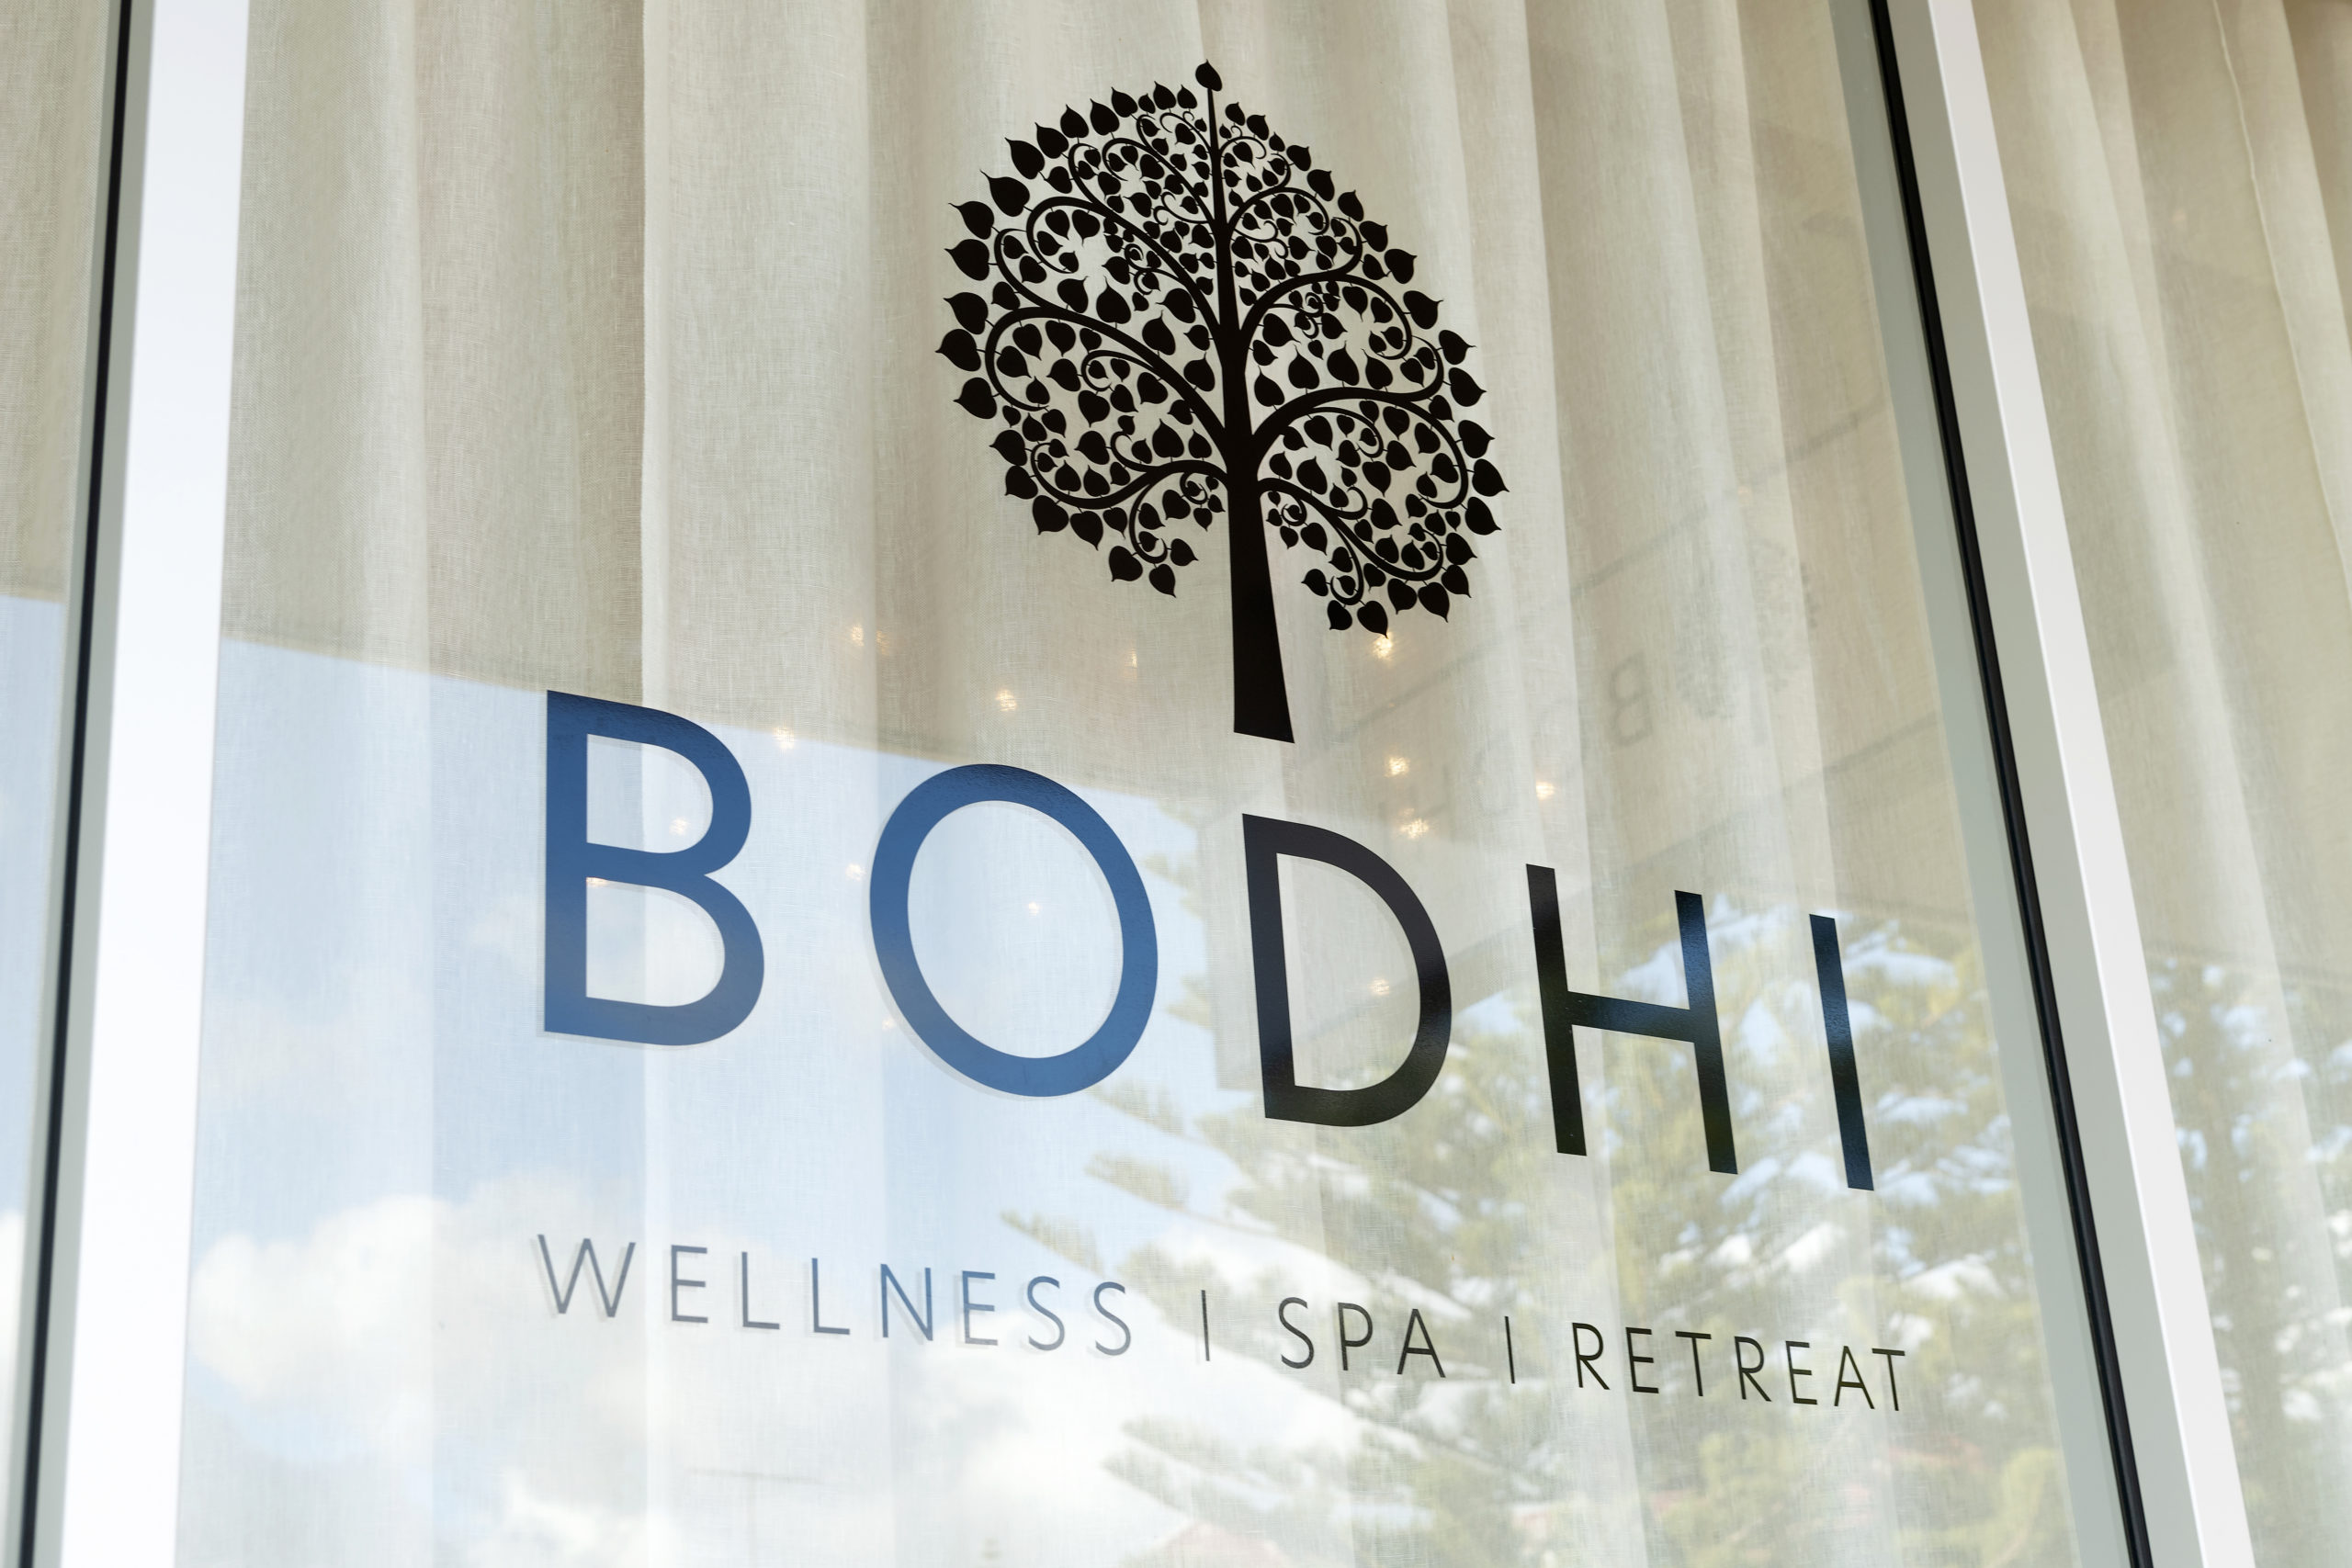 Image of BODHI logo on window with white curtains behind